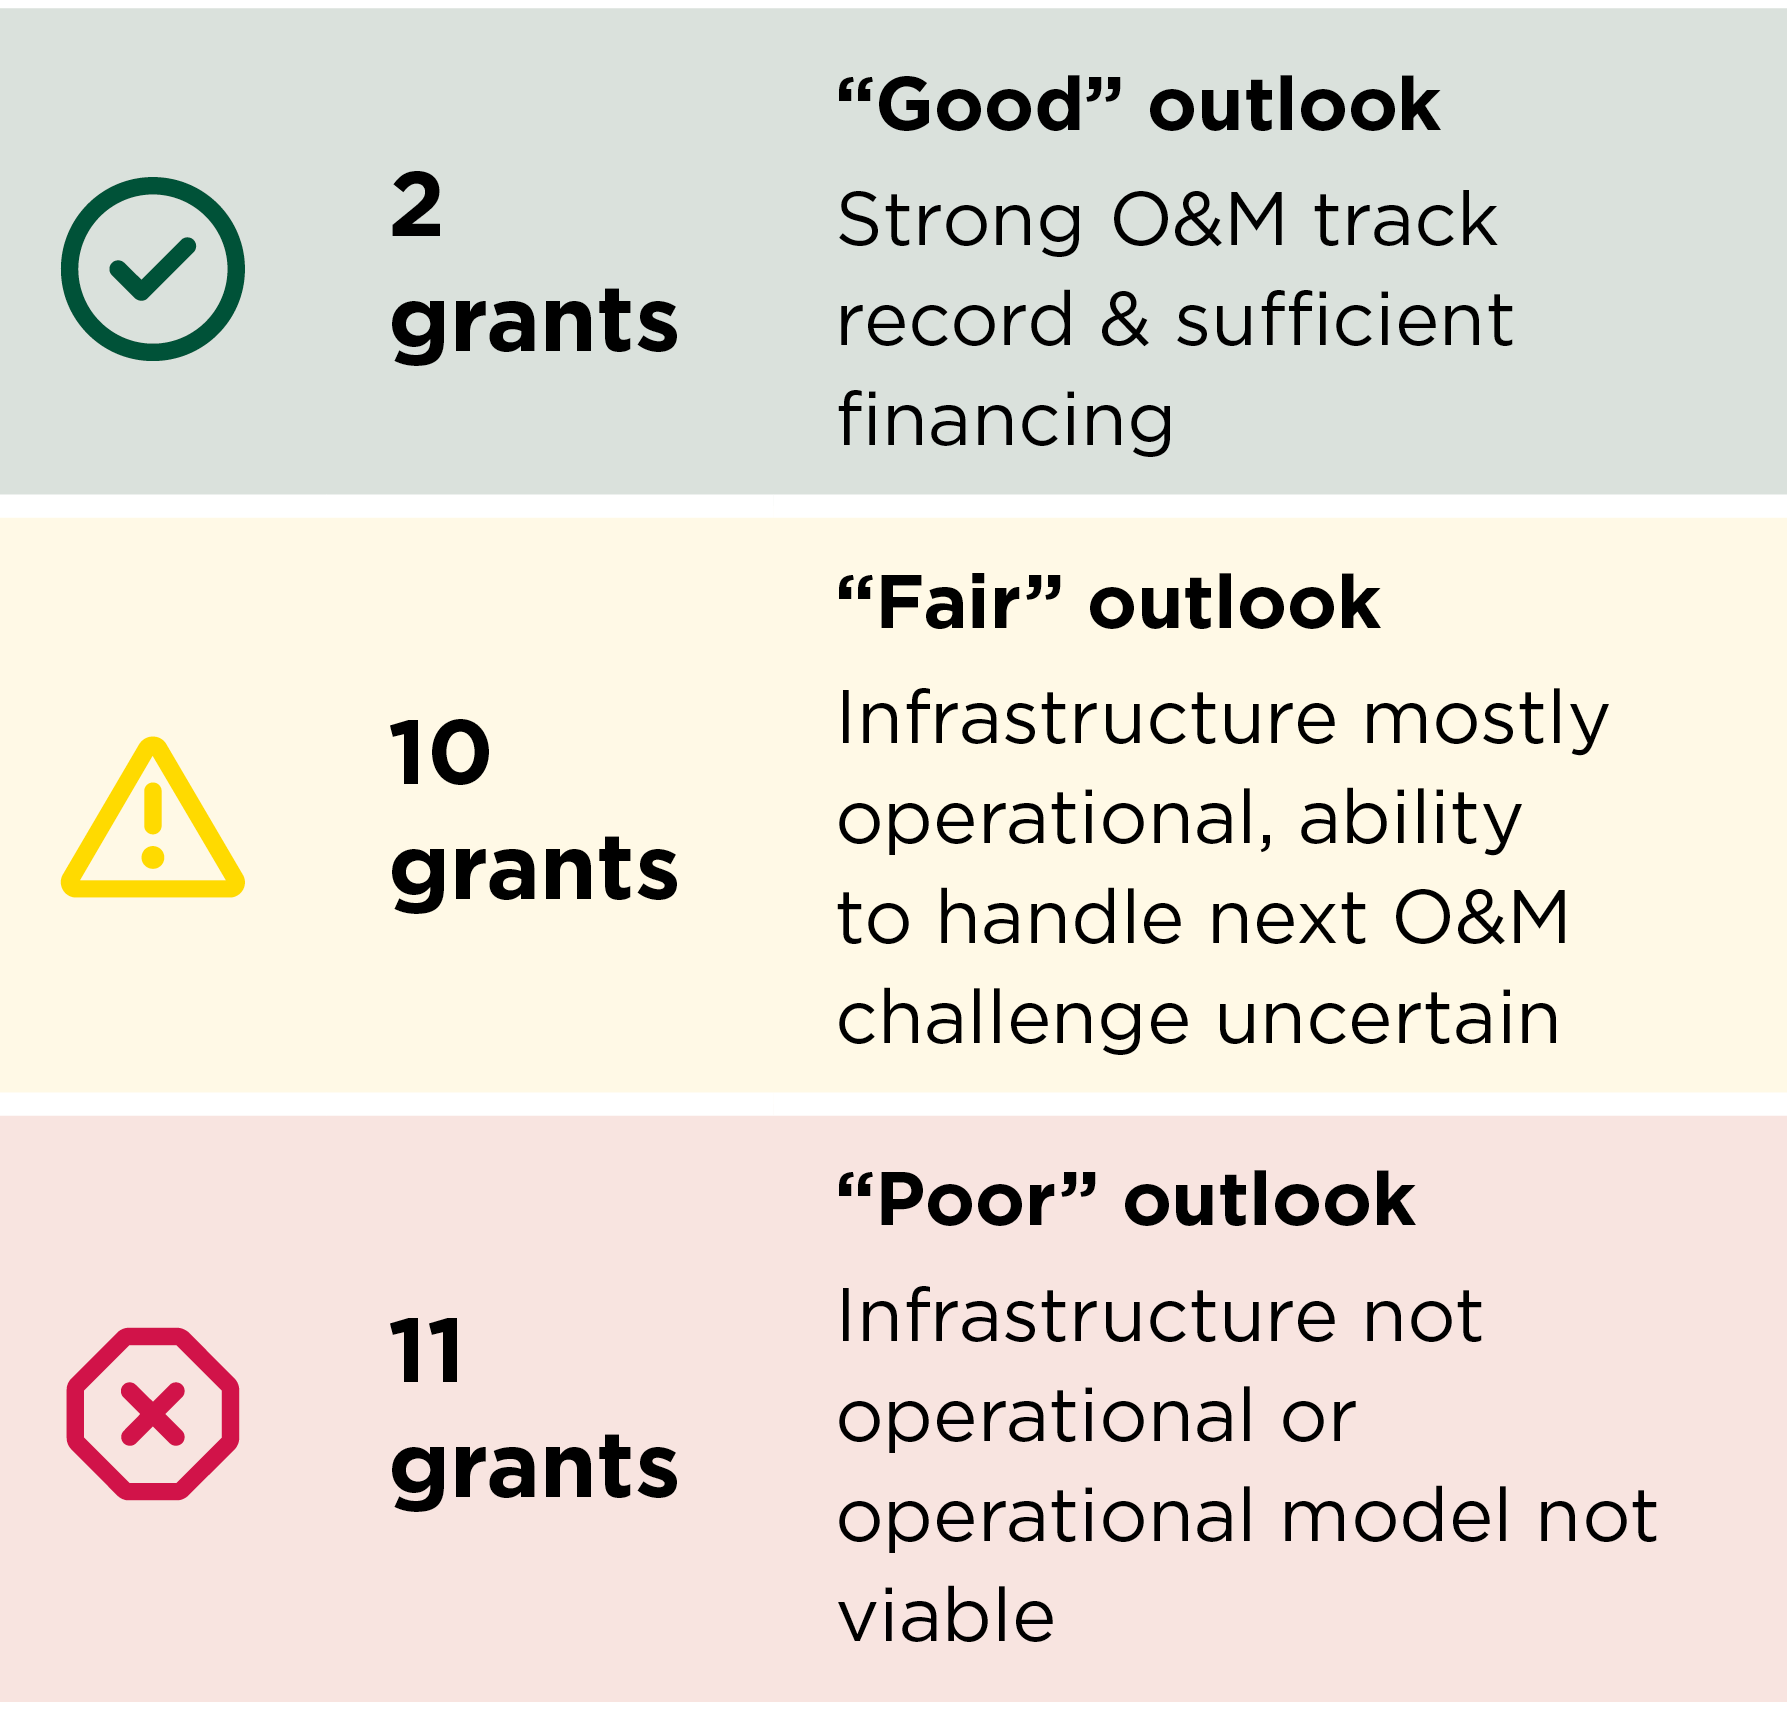 Two grants have a good sustainability outlook. 10 grants have a fair outlook, and 11 have a poor outlook.